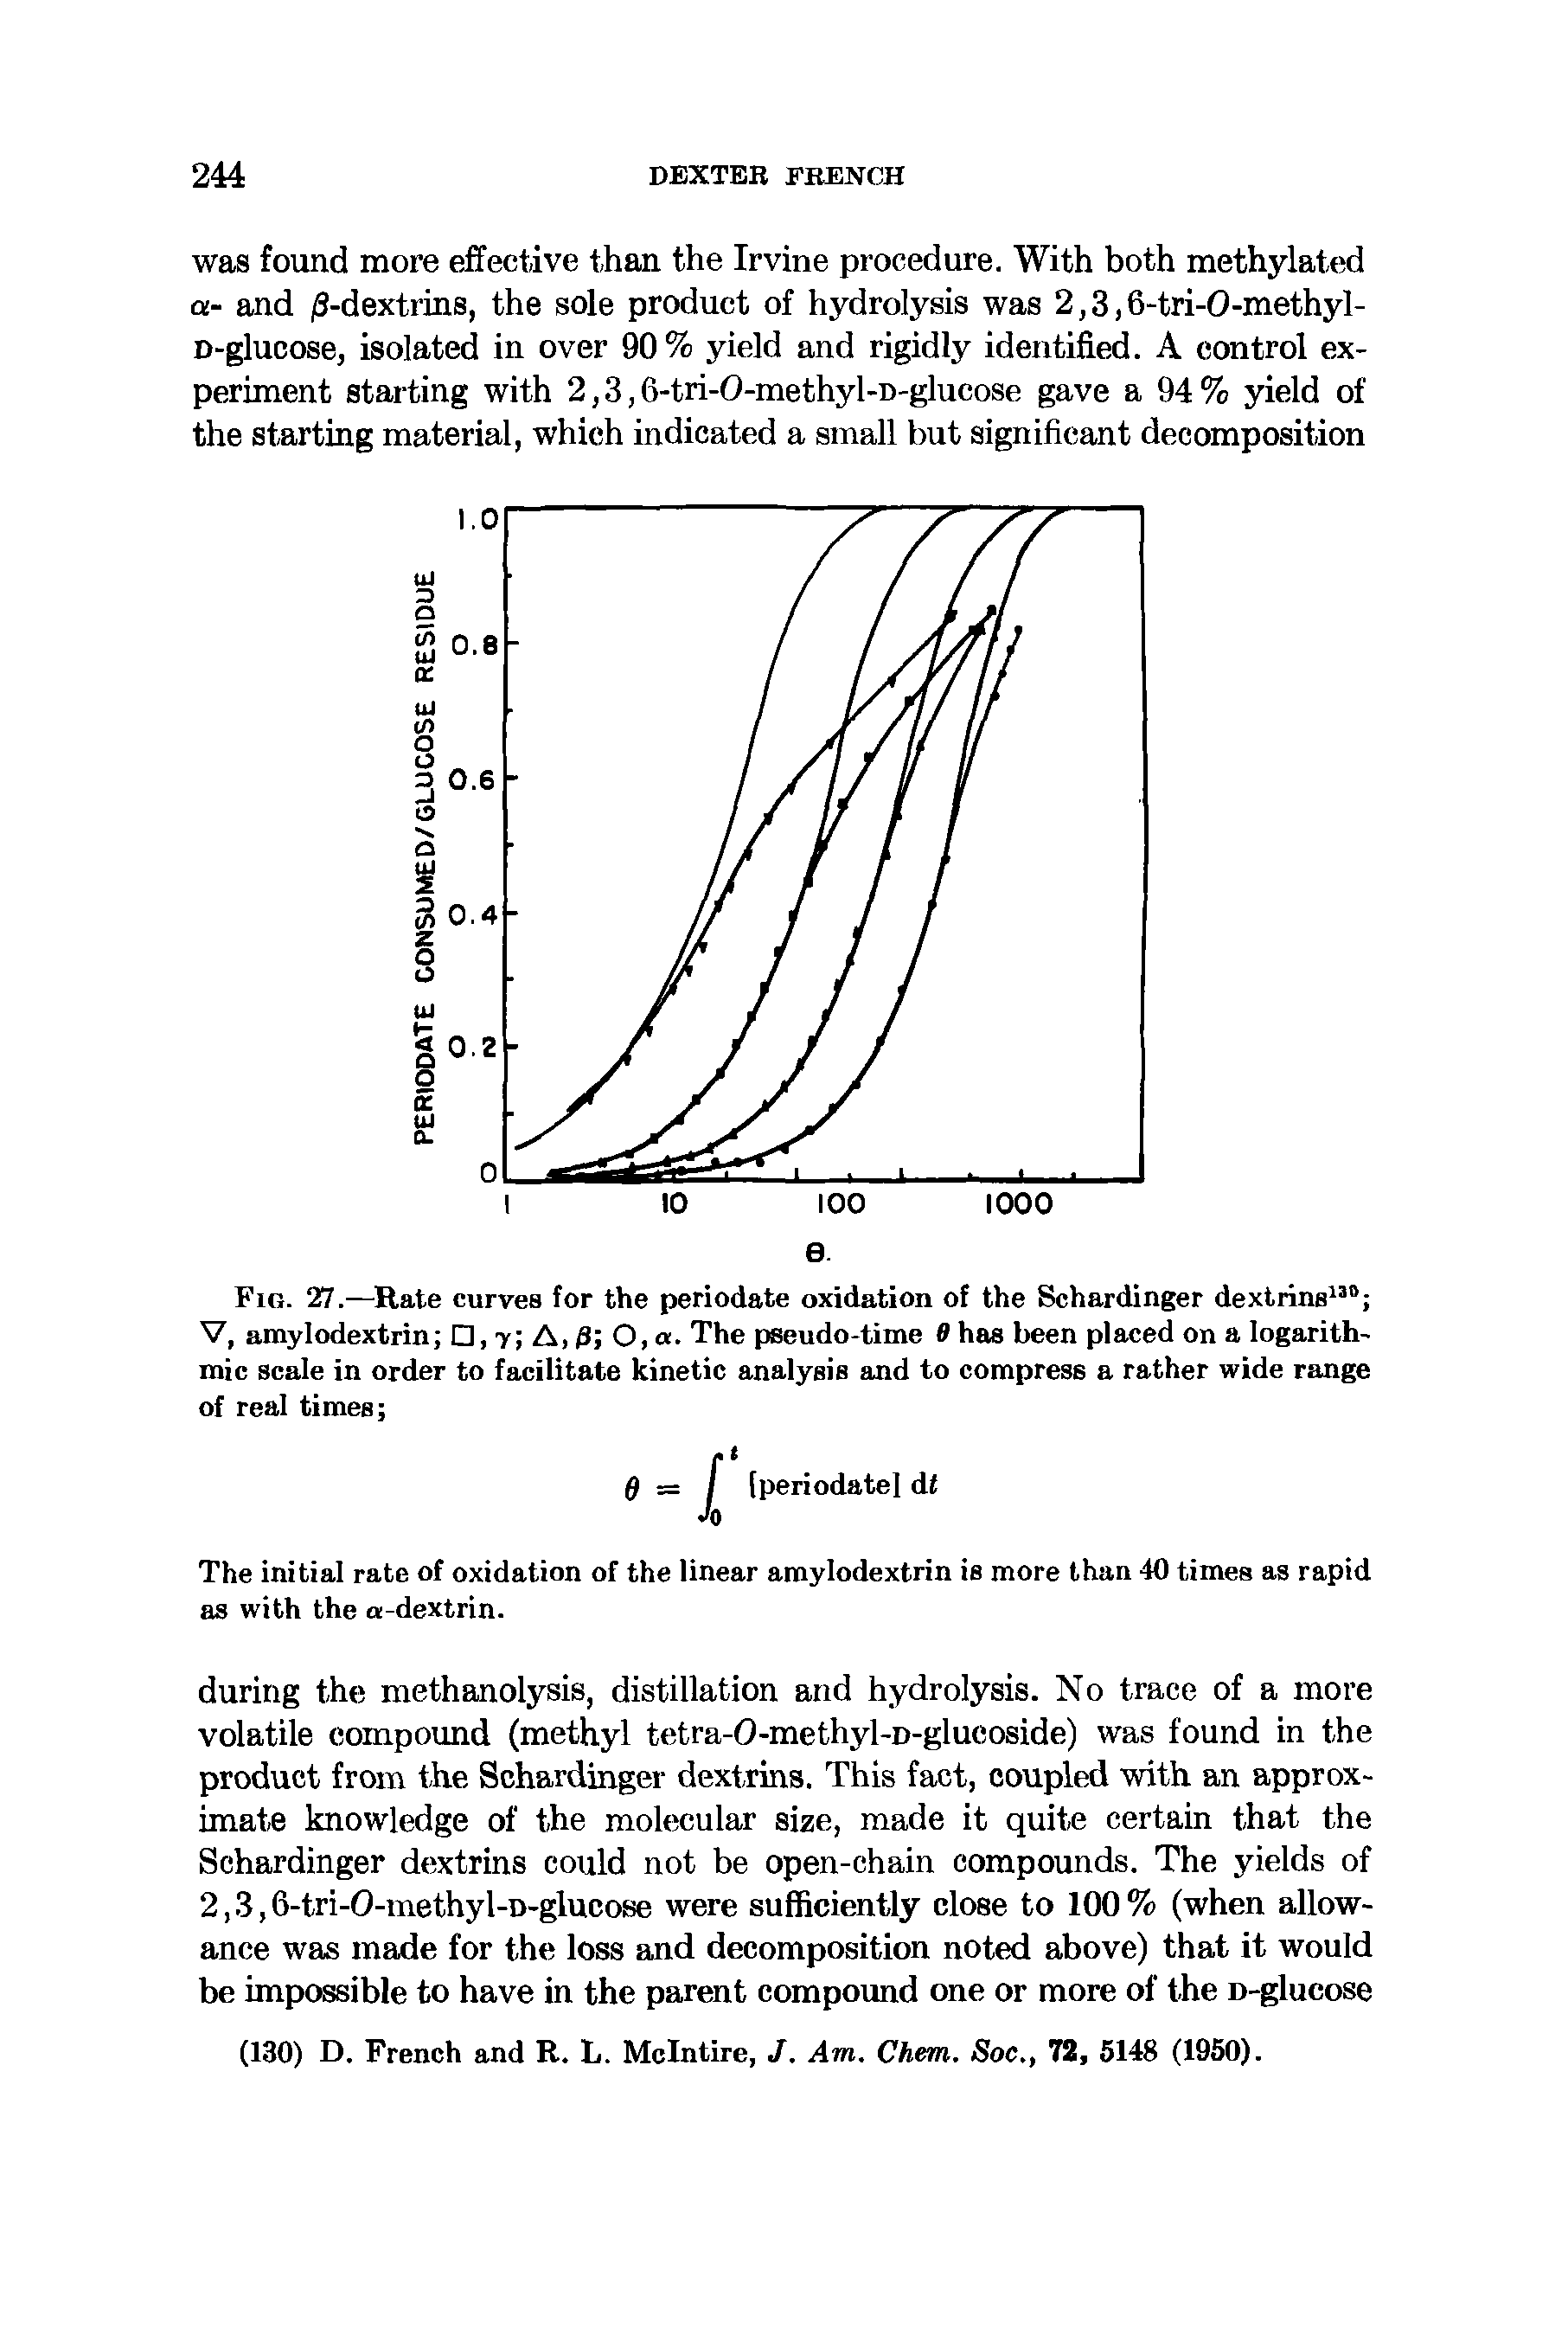 Fig. 27.—Rate curves for the periodate oxidation of the Schardinger dextrins V, amylodextrin , 7 A, 0 0,a. The pseudo-time B has been placed on a logarithmic scale in order to facilitate kinetic analysis and to compress a rather wide range of real times ...